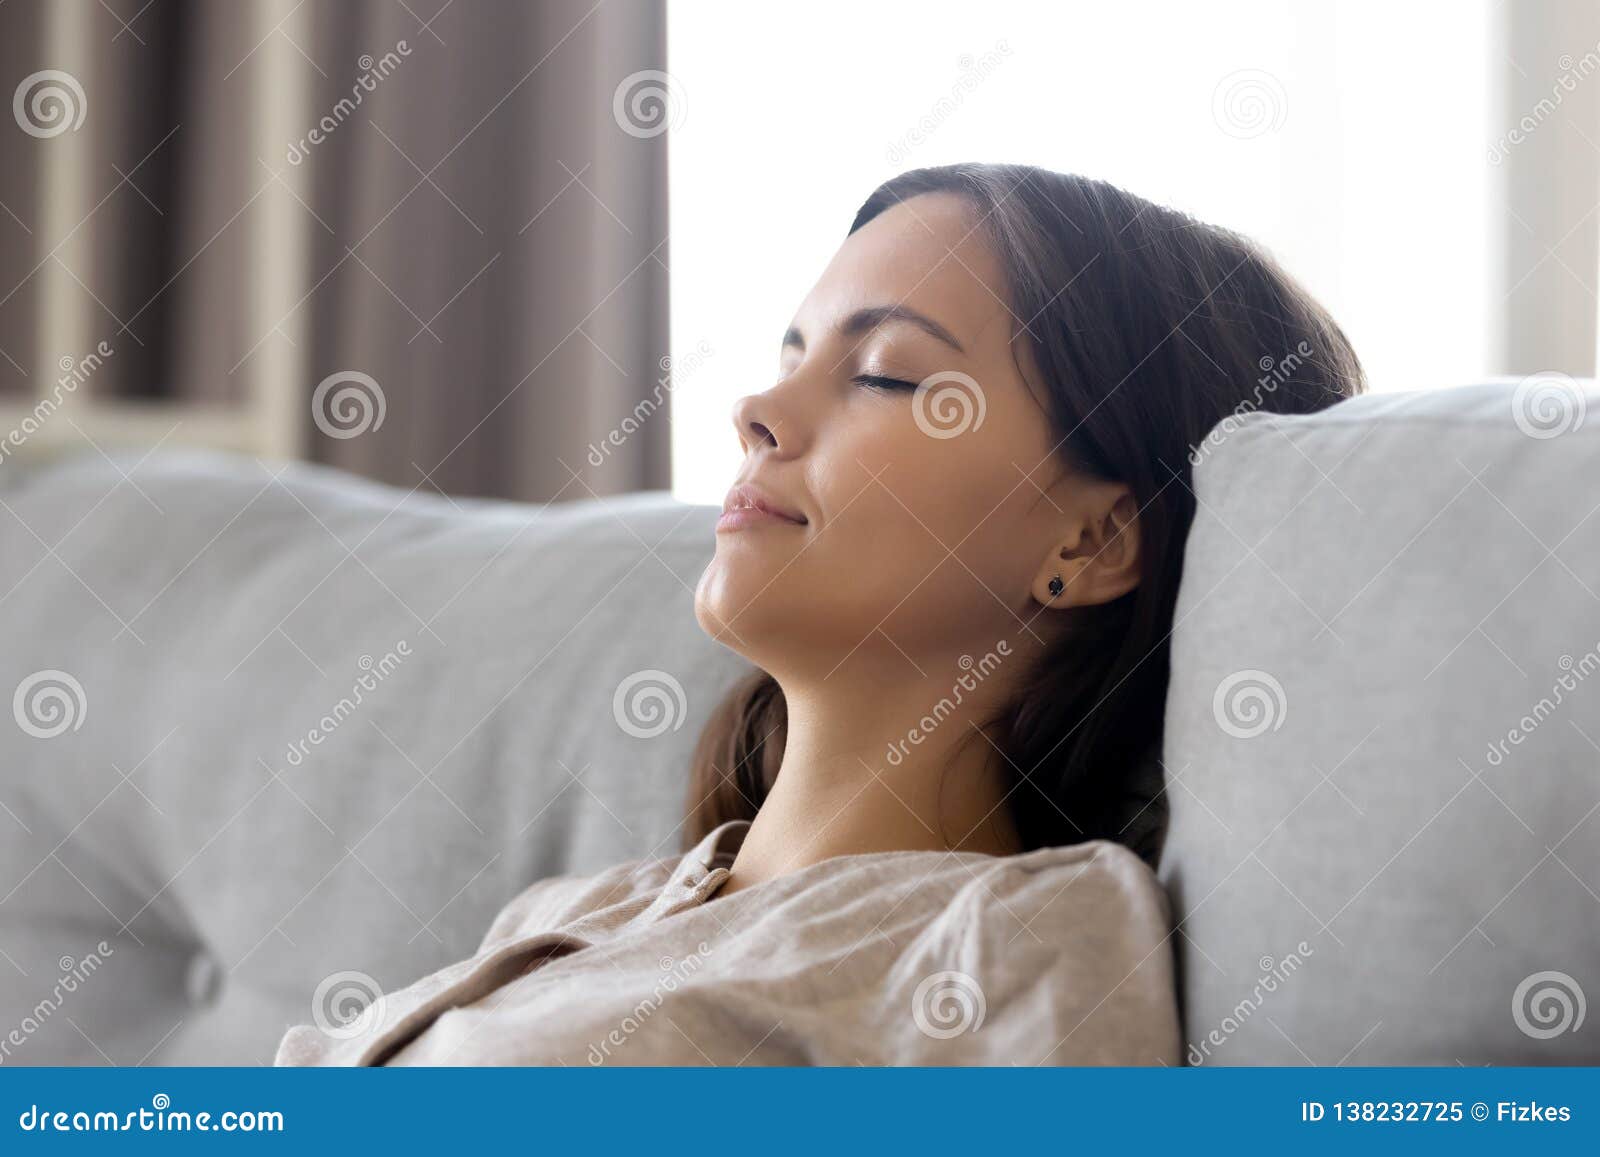 serene calm woman relaxing leaning on comfortable couch having nap